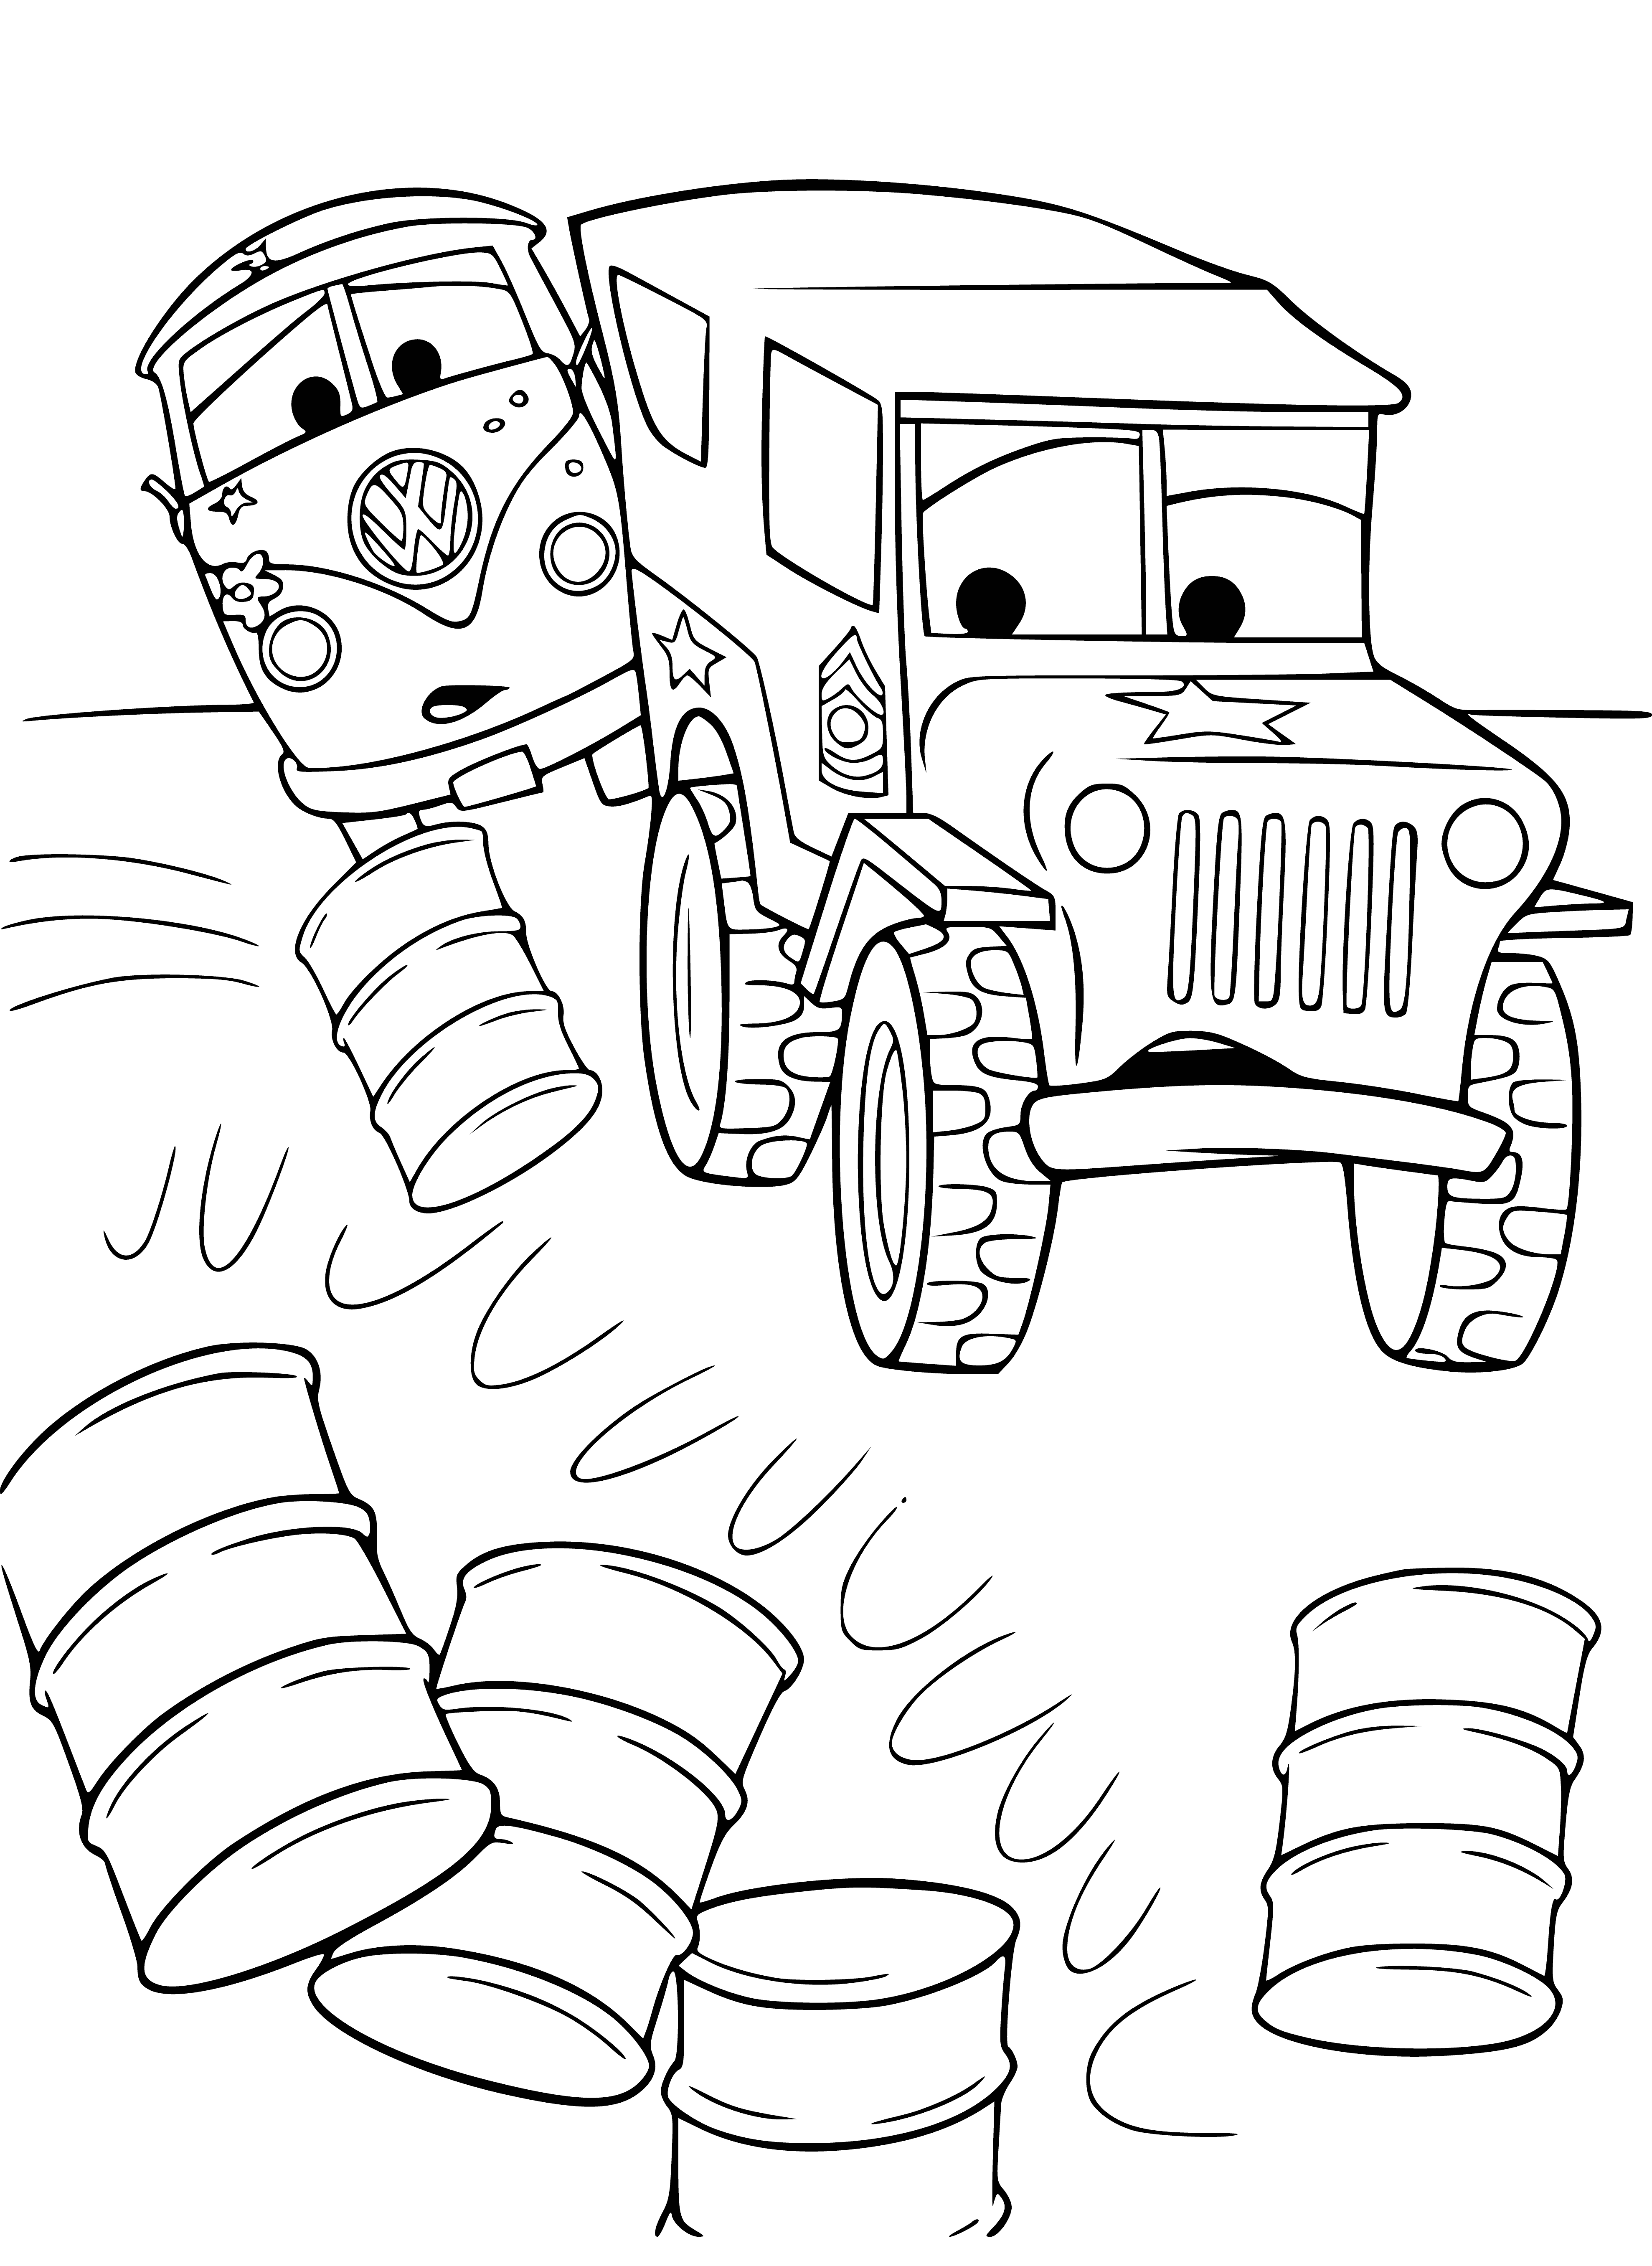 Barrels and machines coloring page